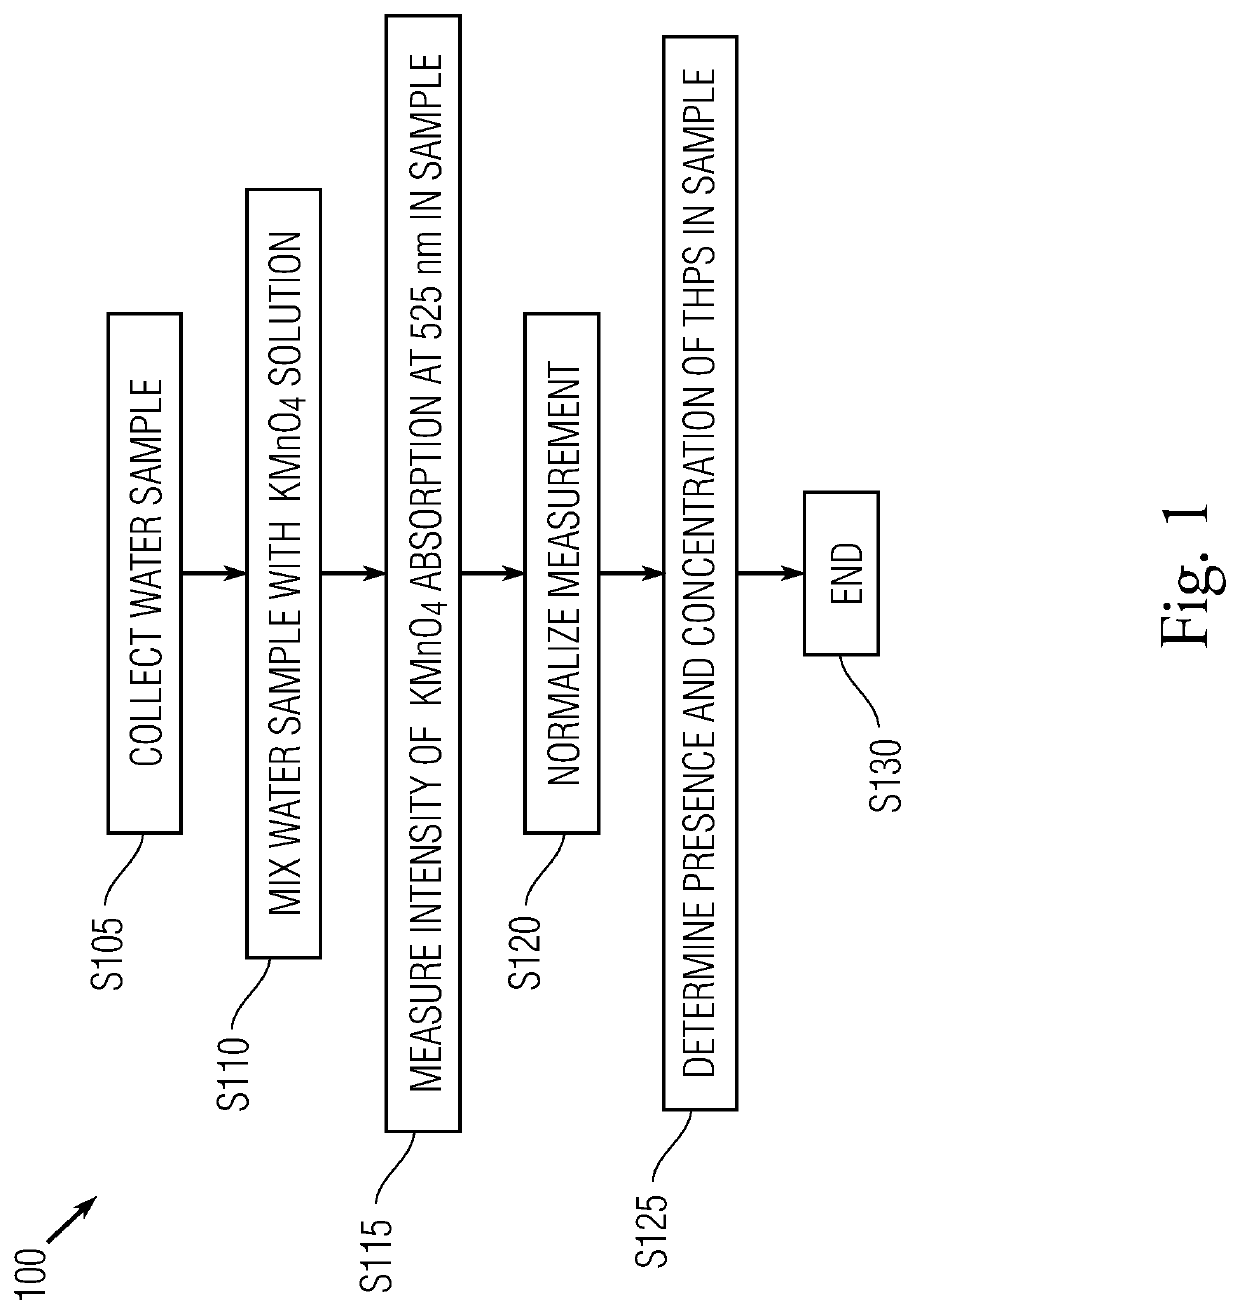 Methods for detecting and quantifying tetrakis(hydroxymethyl)phosphonium sulfate (THPS) in biocide products